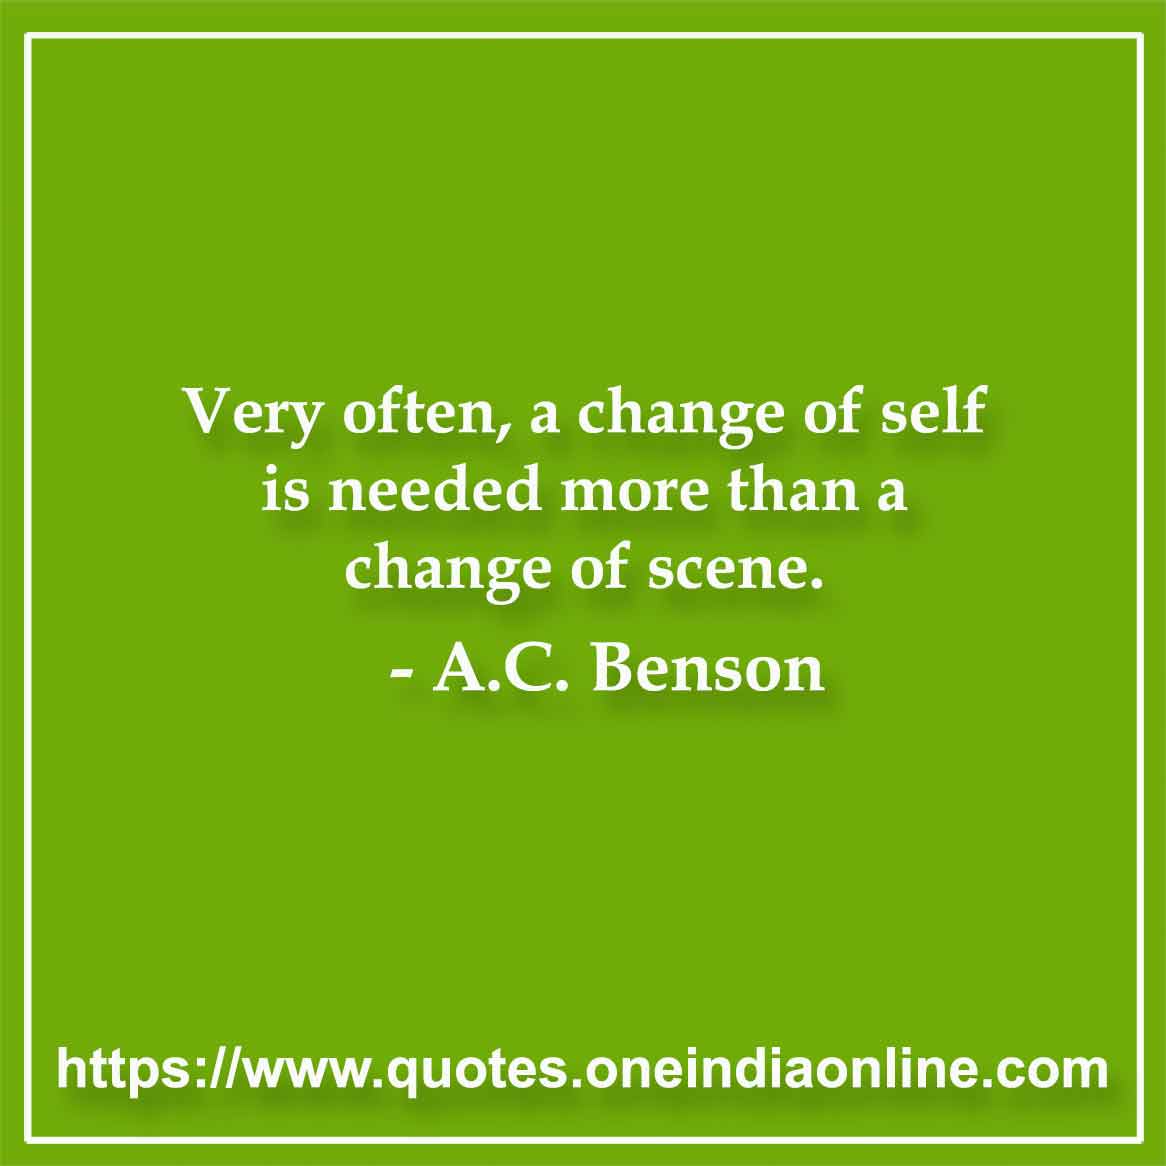 Very often, a change of self is needed more than a change of scene.

-  A.C. Benson